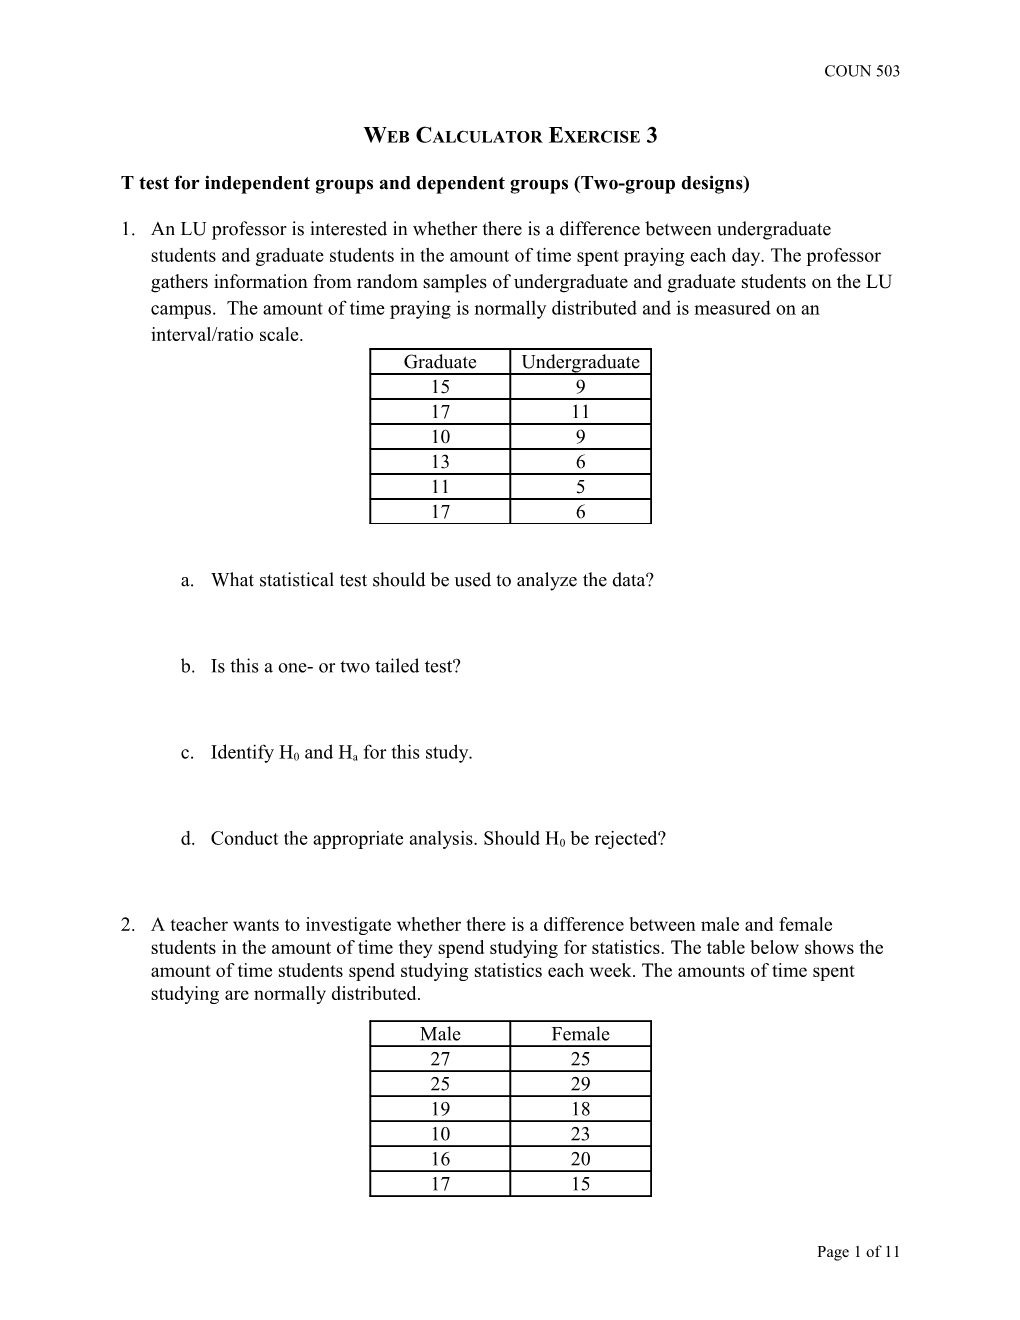 T Test for Independent Groups and Dependent Groups (Two-Group Designs)